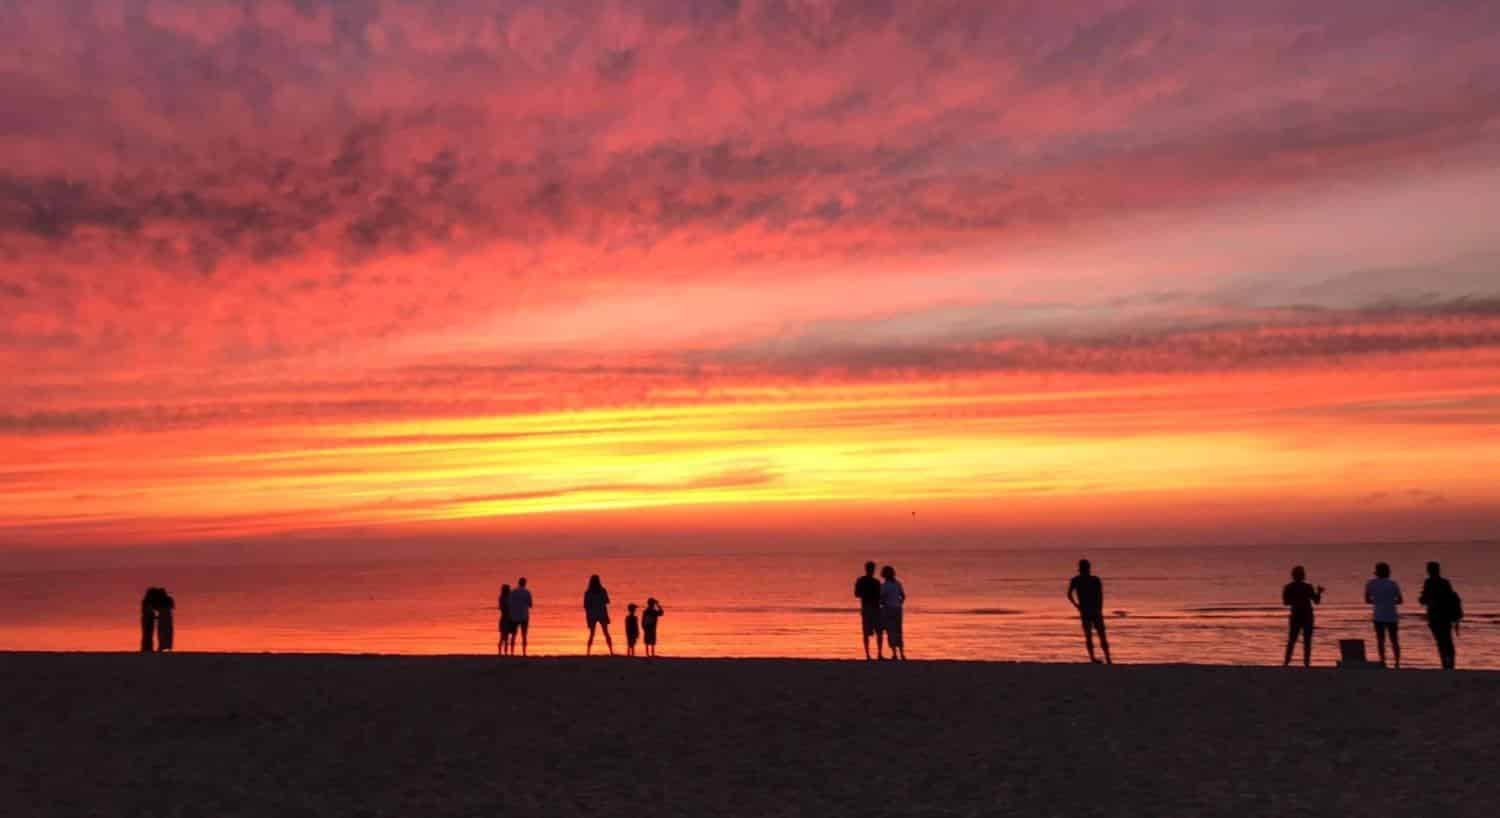 People on a beach watching a sunrise with clouds in the sky coloroed yellow, orange, pink, and purple